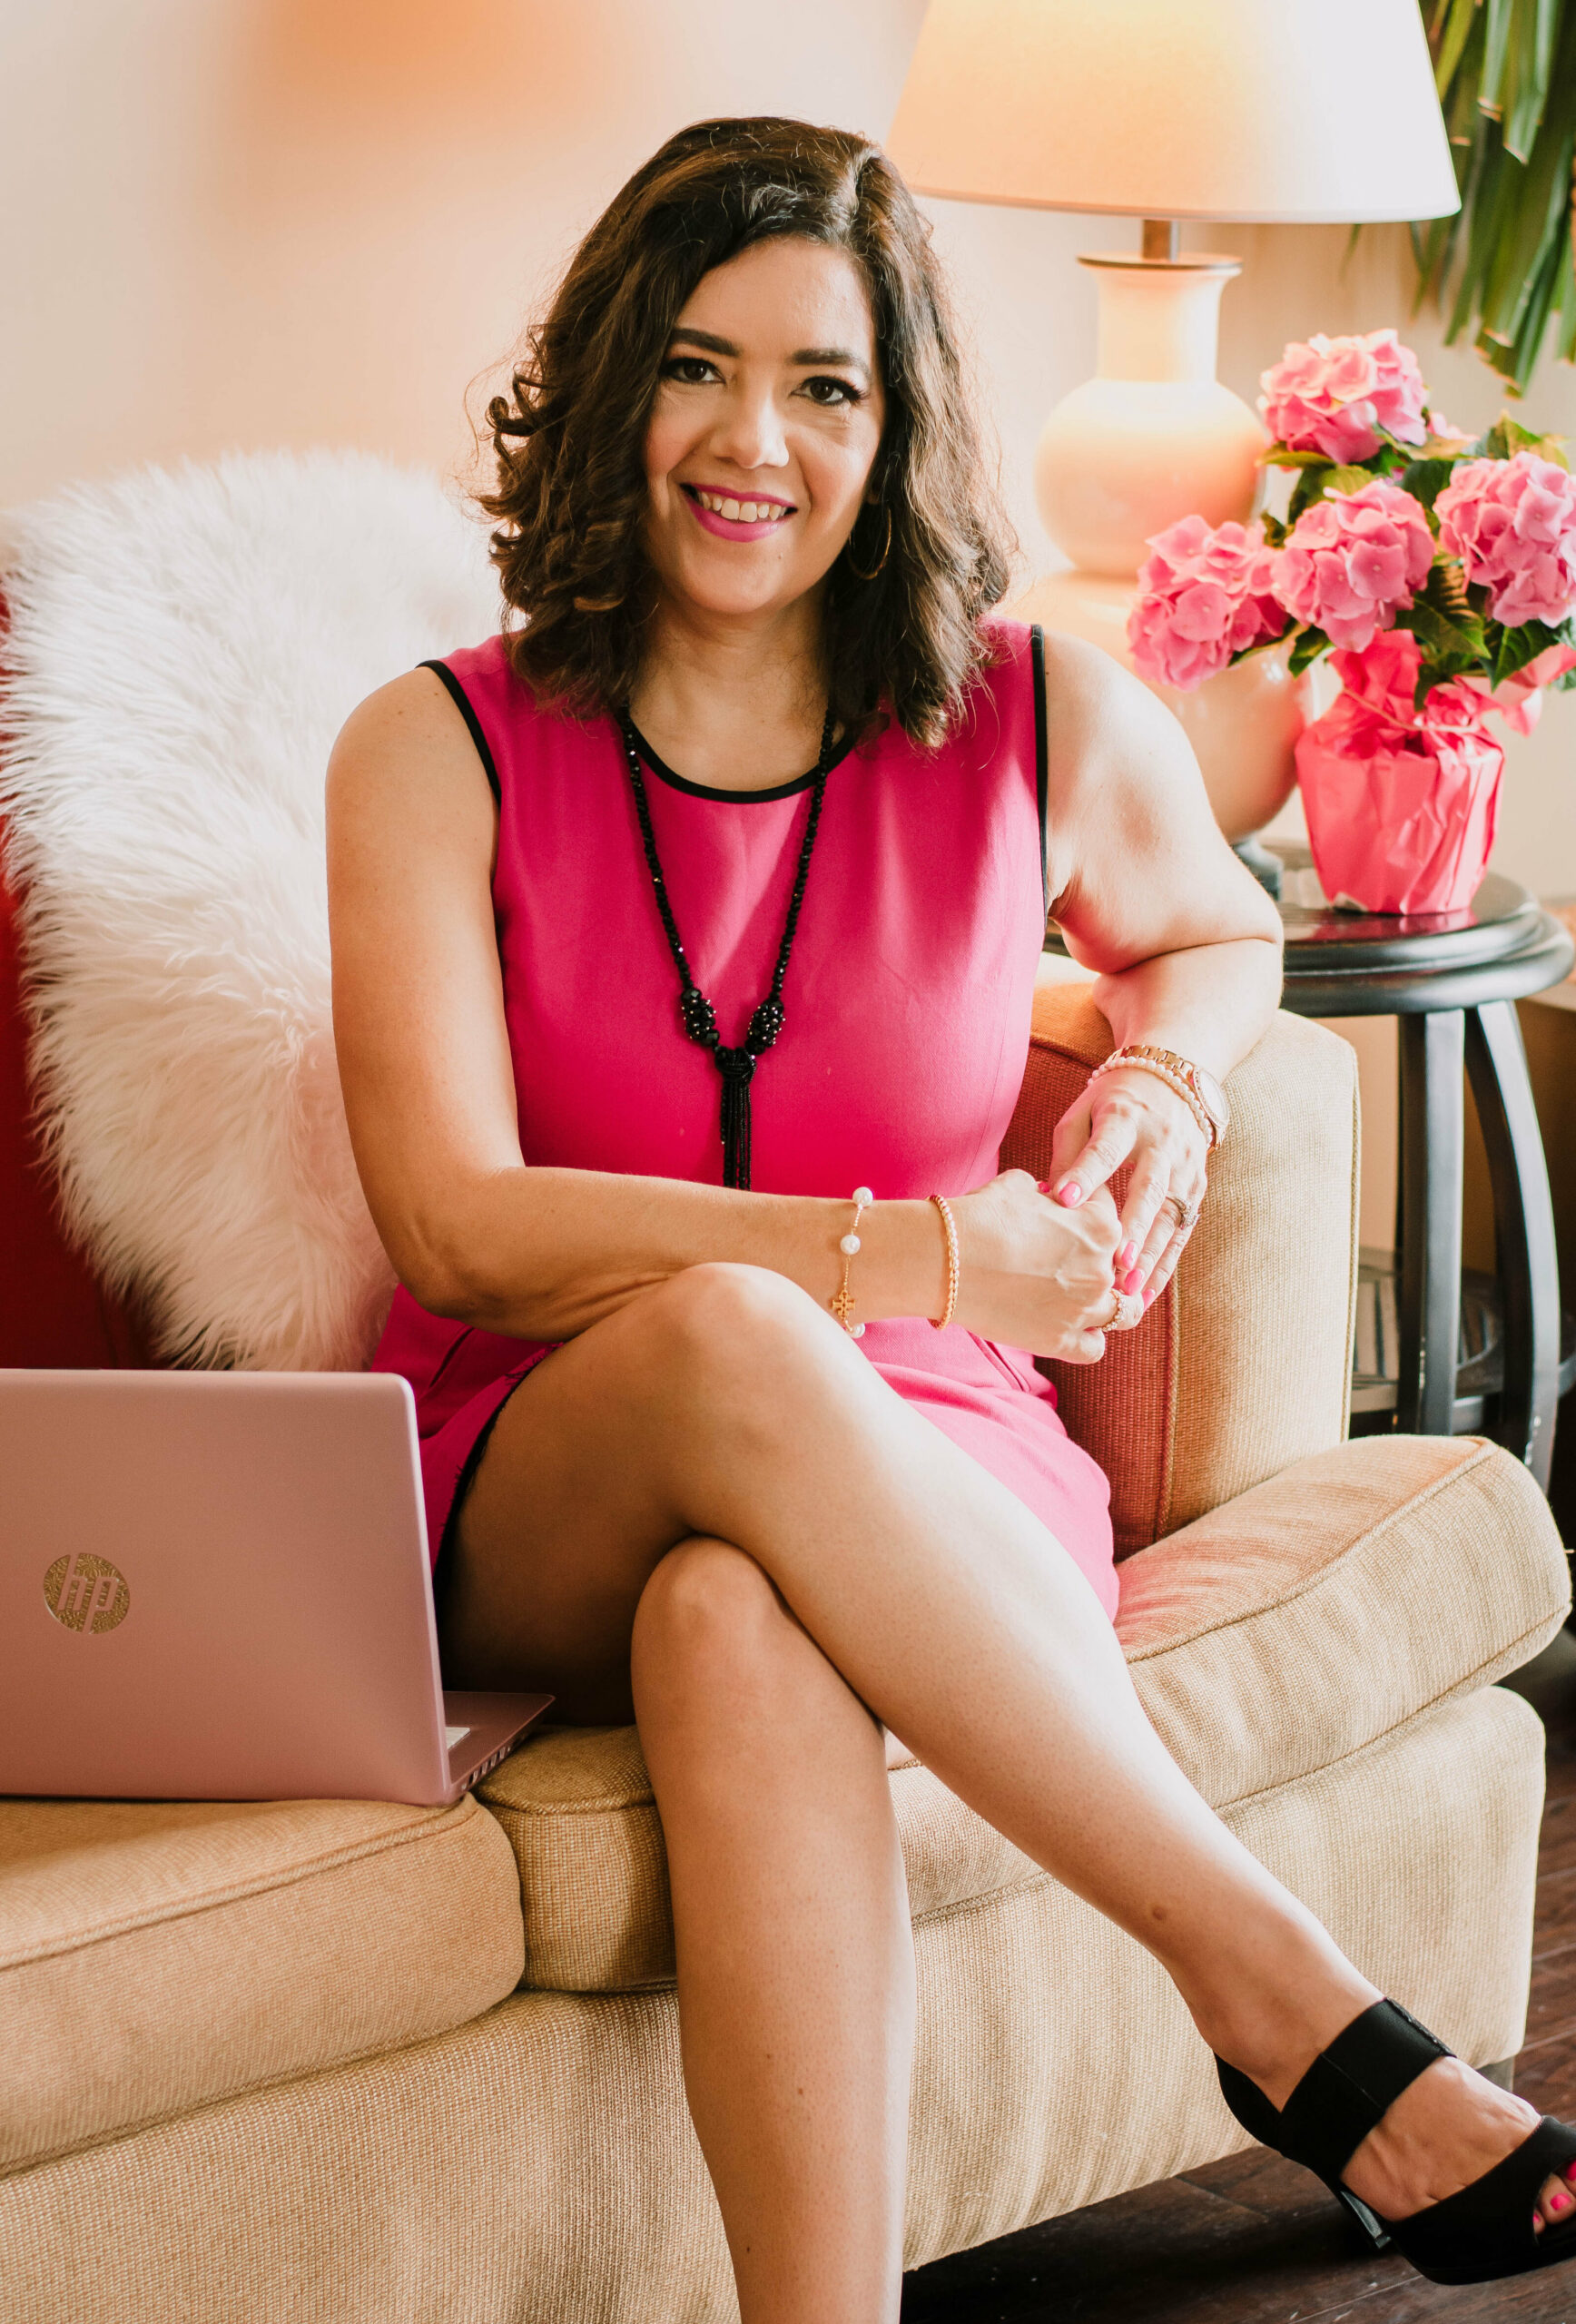 Image of Nancy Brown, a life and business coach, sitting confidently in a large chair, elegantly dressed in a pink attire. The photo captures the essence of her coaching practice, radiating professionalism and empowerment.